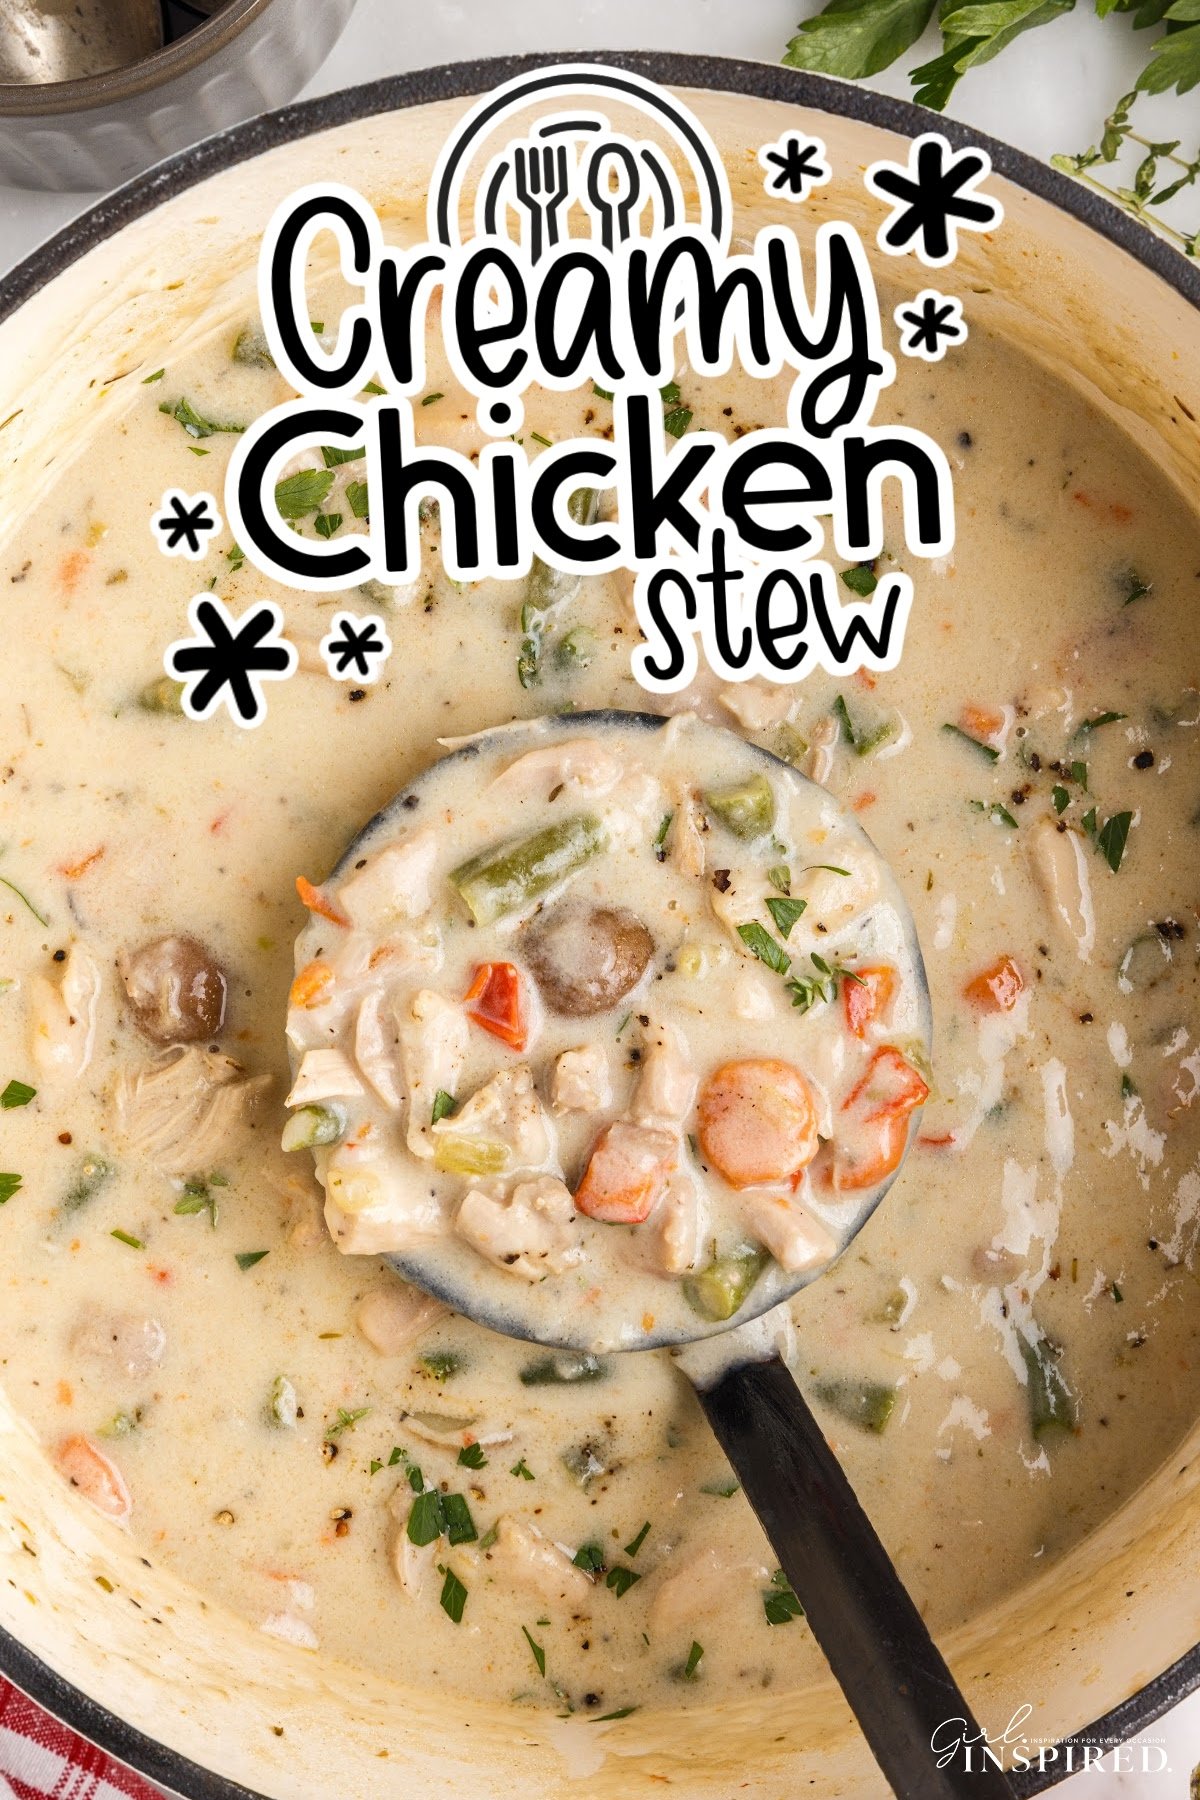 Pot filled with Creamy Chicken Stew with a laddle spooning some out, with text overlay.